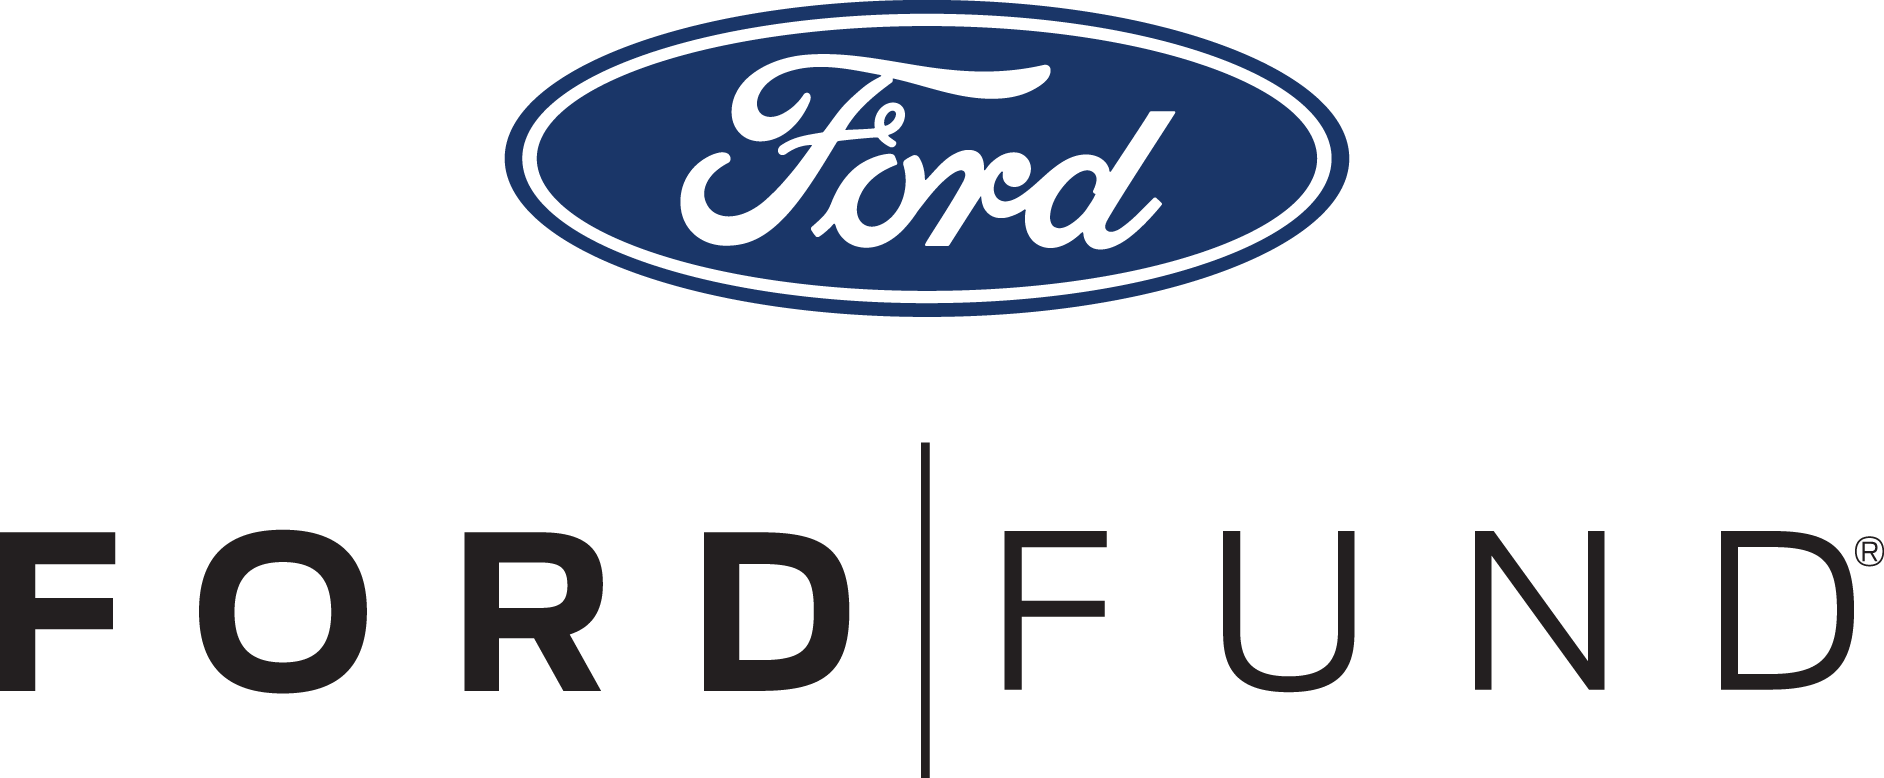 All Blue Oval Logo - Ford Fund | Ford Blue Oval Network